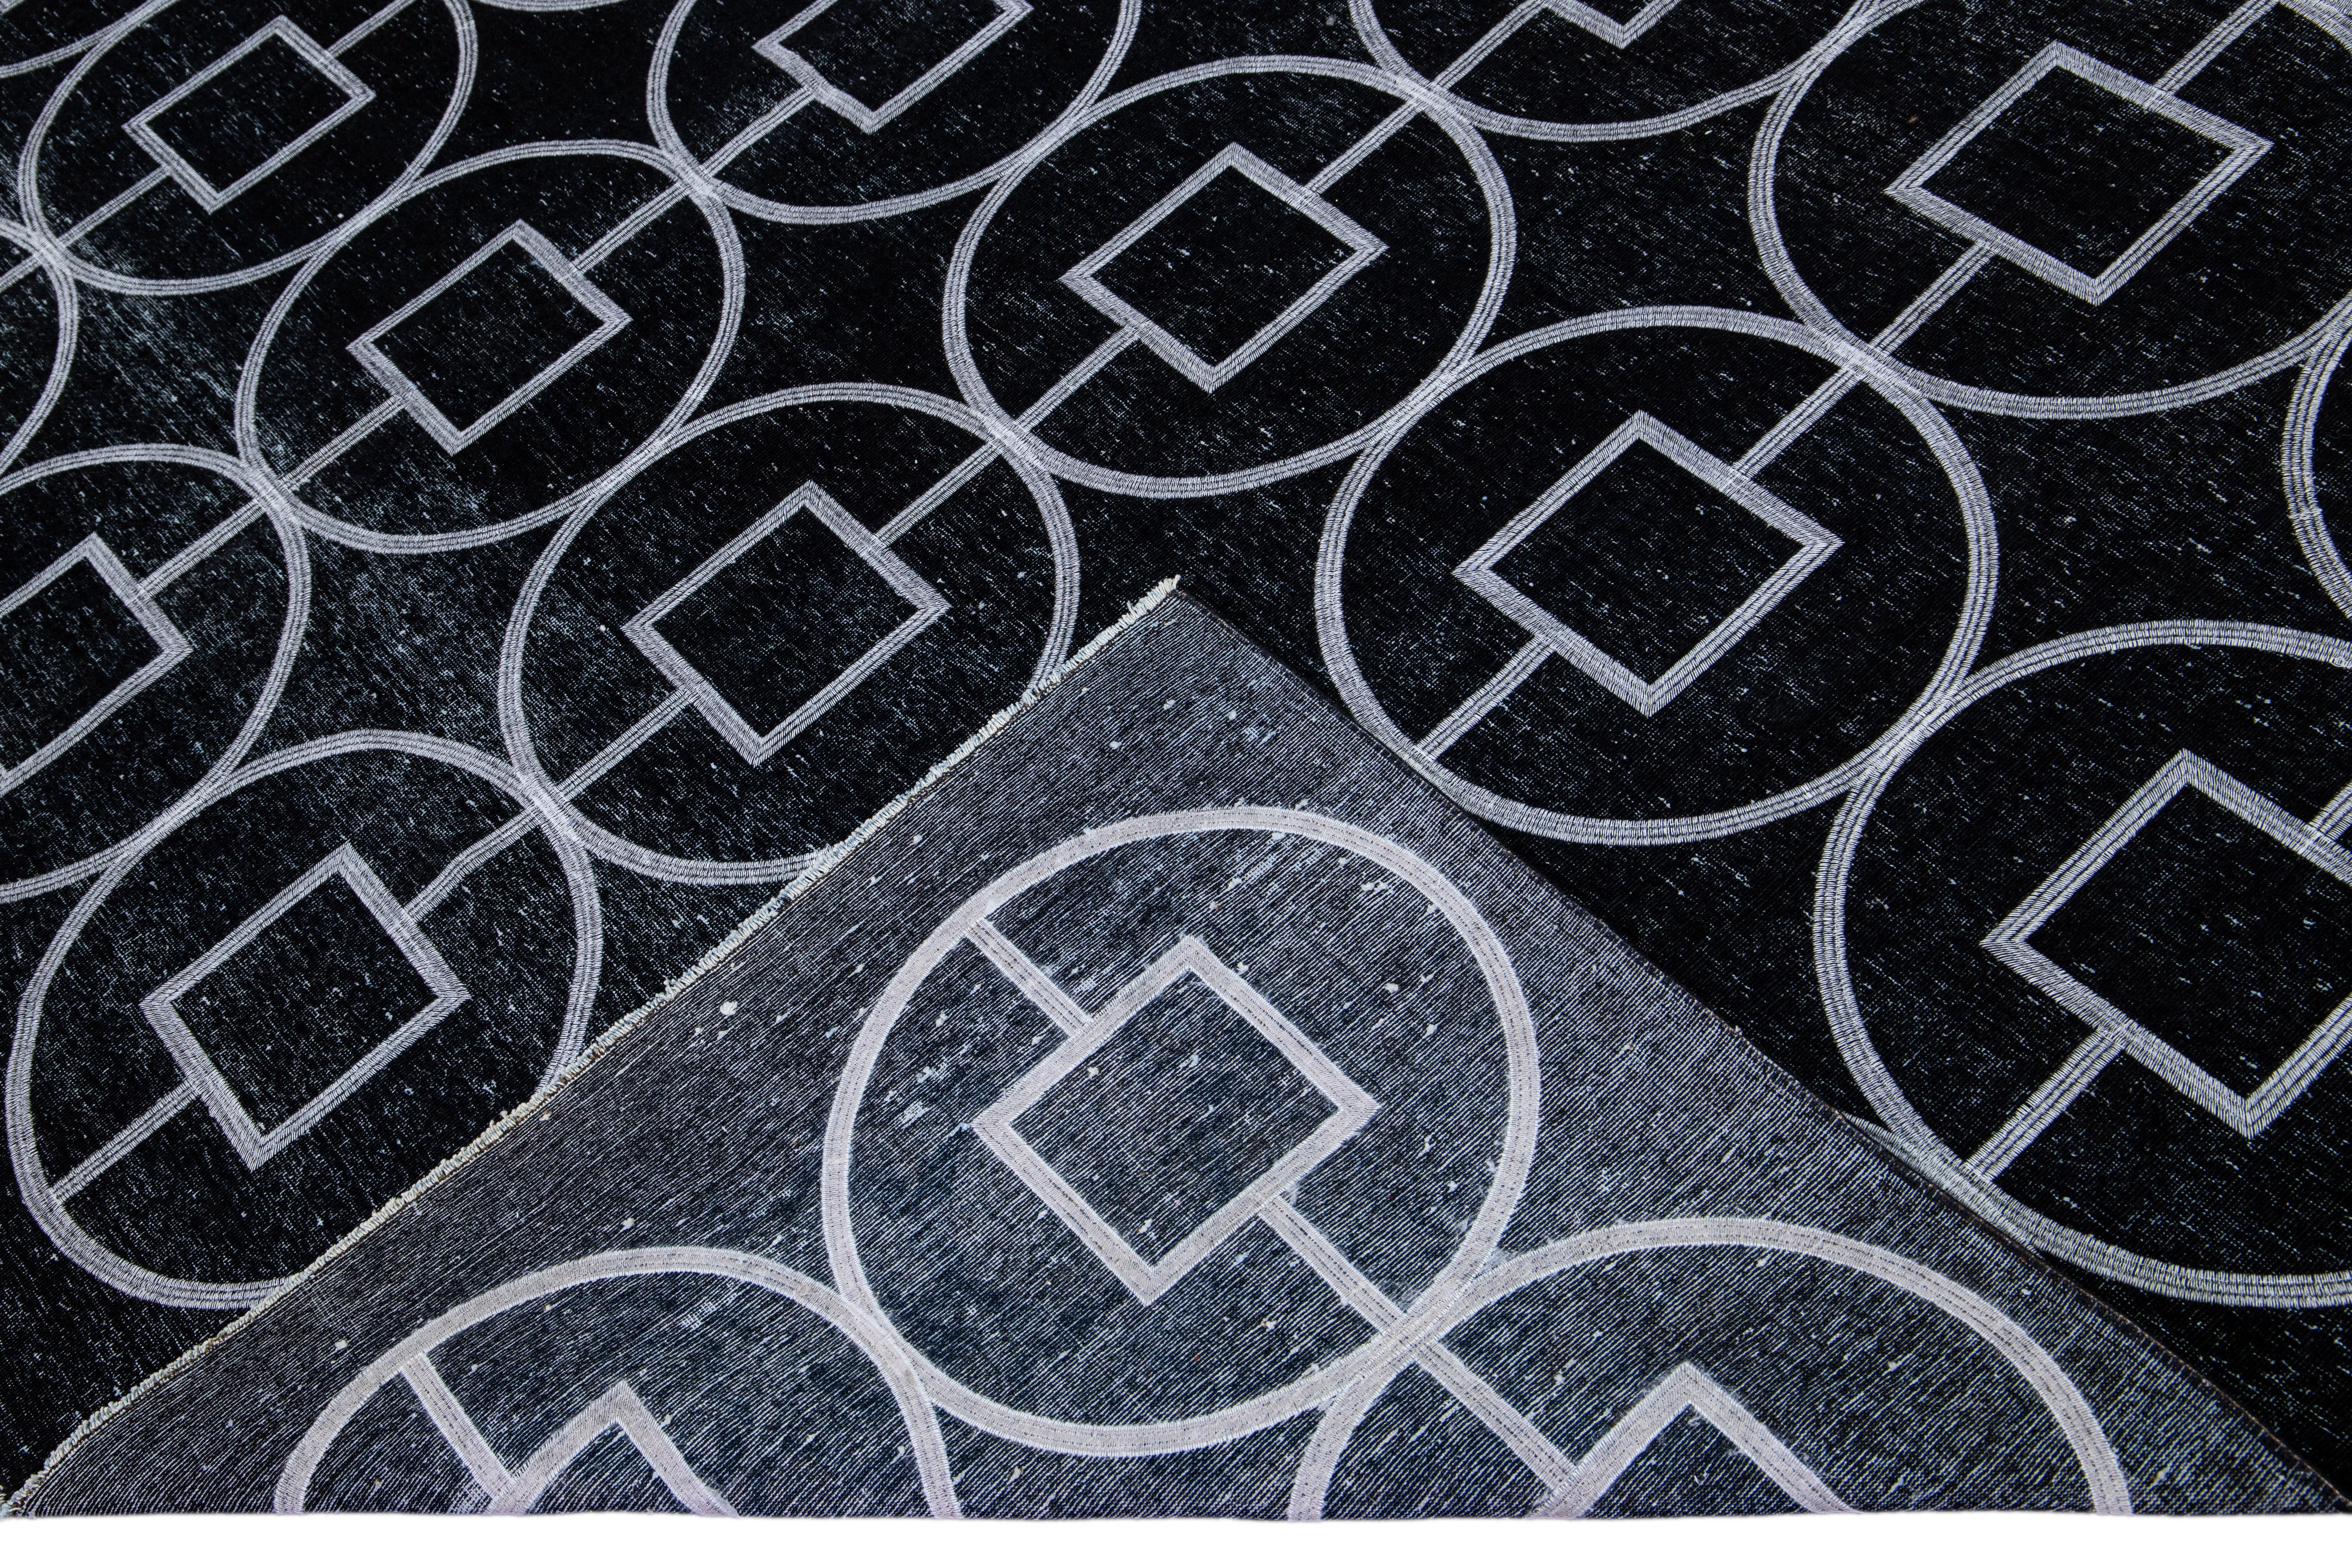 Beautiful Turkish handmade wool rug with a black distress look field. This Modern rug has white accents featuring a gorgeous all-over geometric pattern design.

This rug measures: 9'8